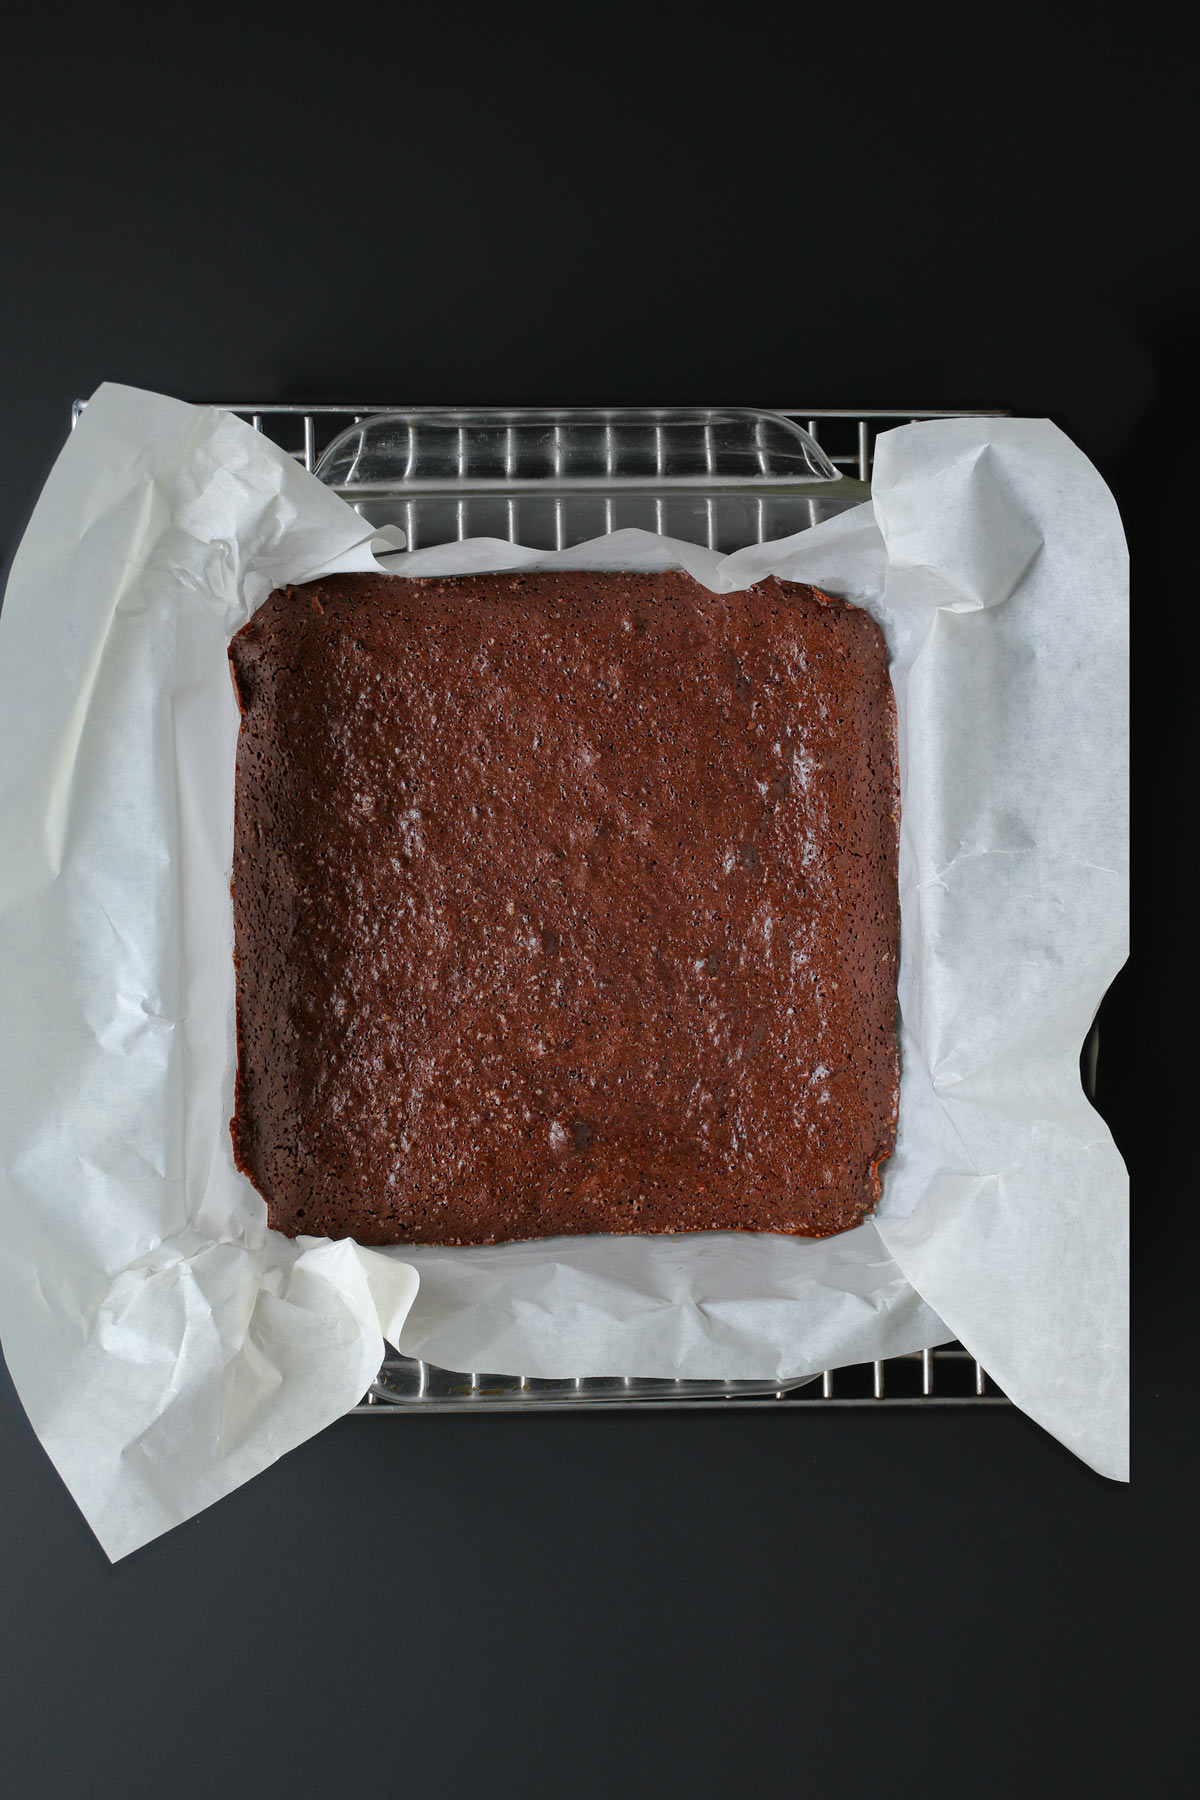 baked brownie layer cooling on a rack.